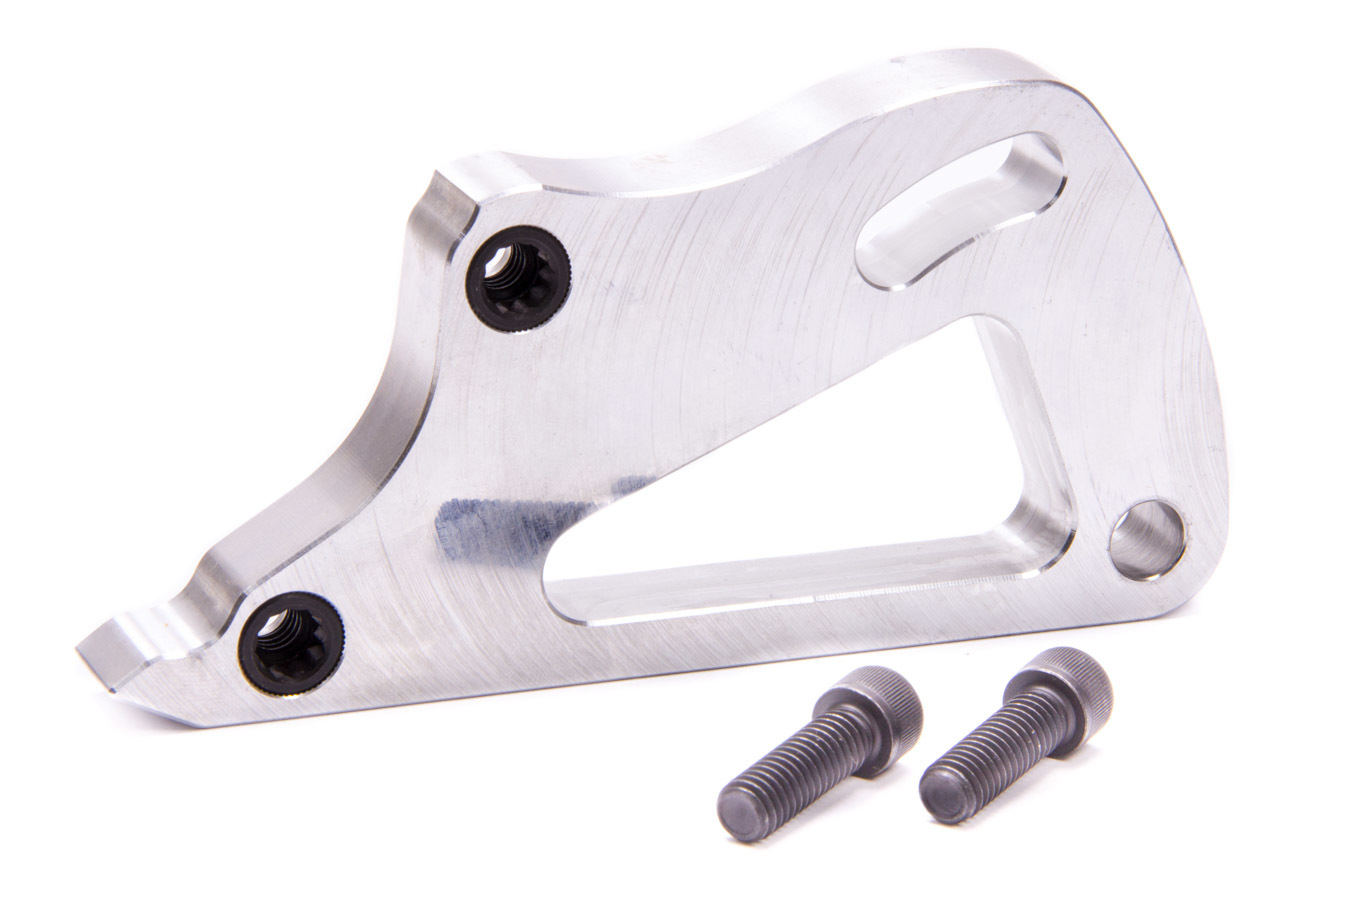 Peterson Fluid 14-3201-001 Oil Pump Bracket, External, Dry Sump, Driver Side Mount, Aluminum, Clear Anodized, Small Block Ford, Kit